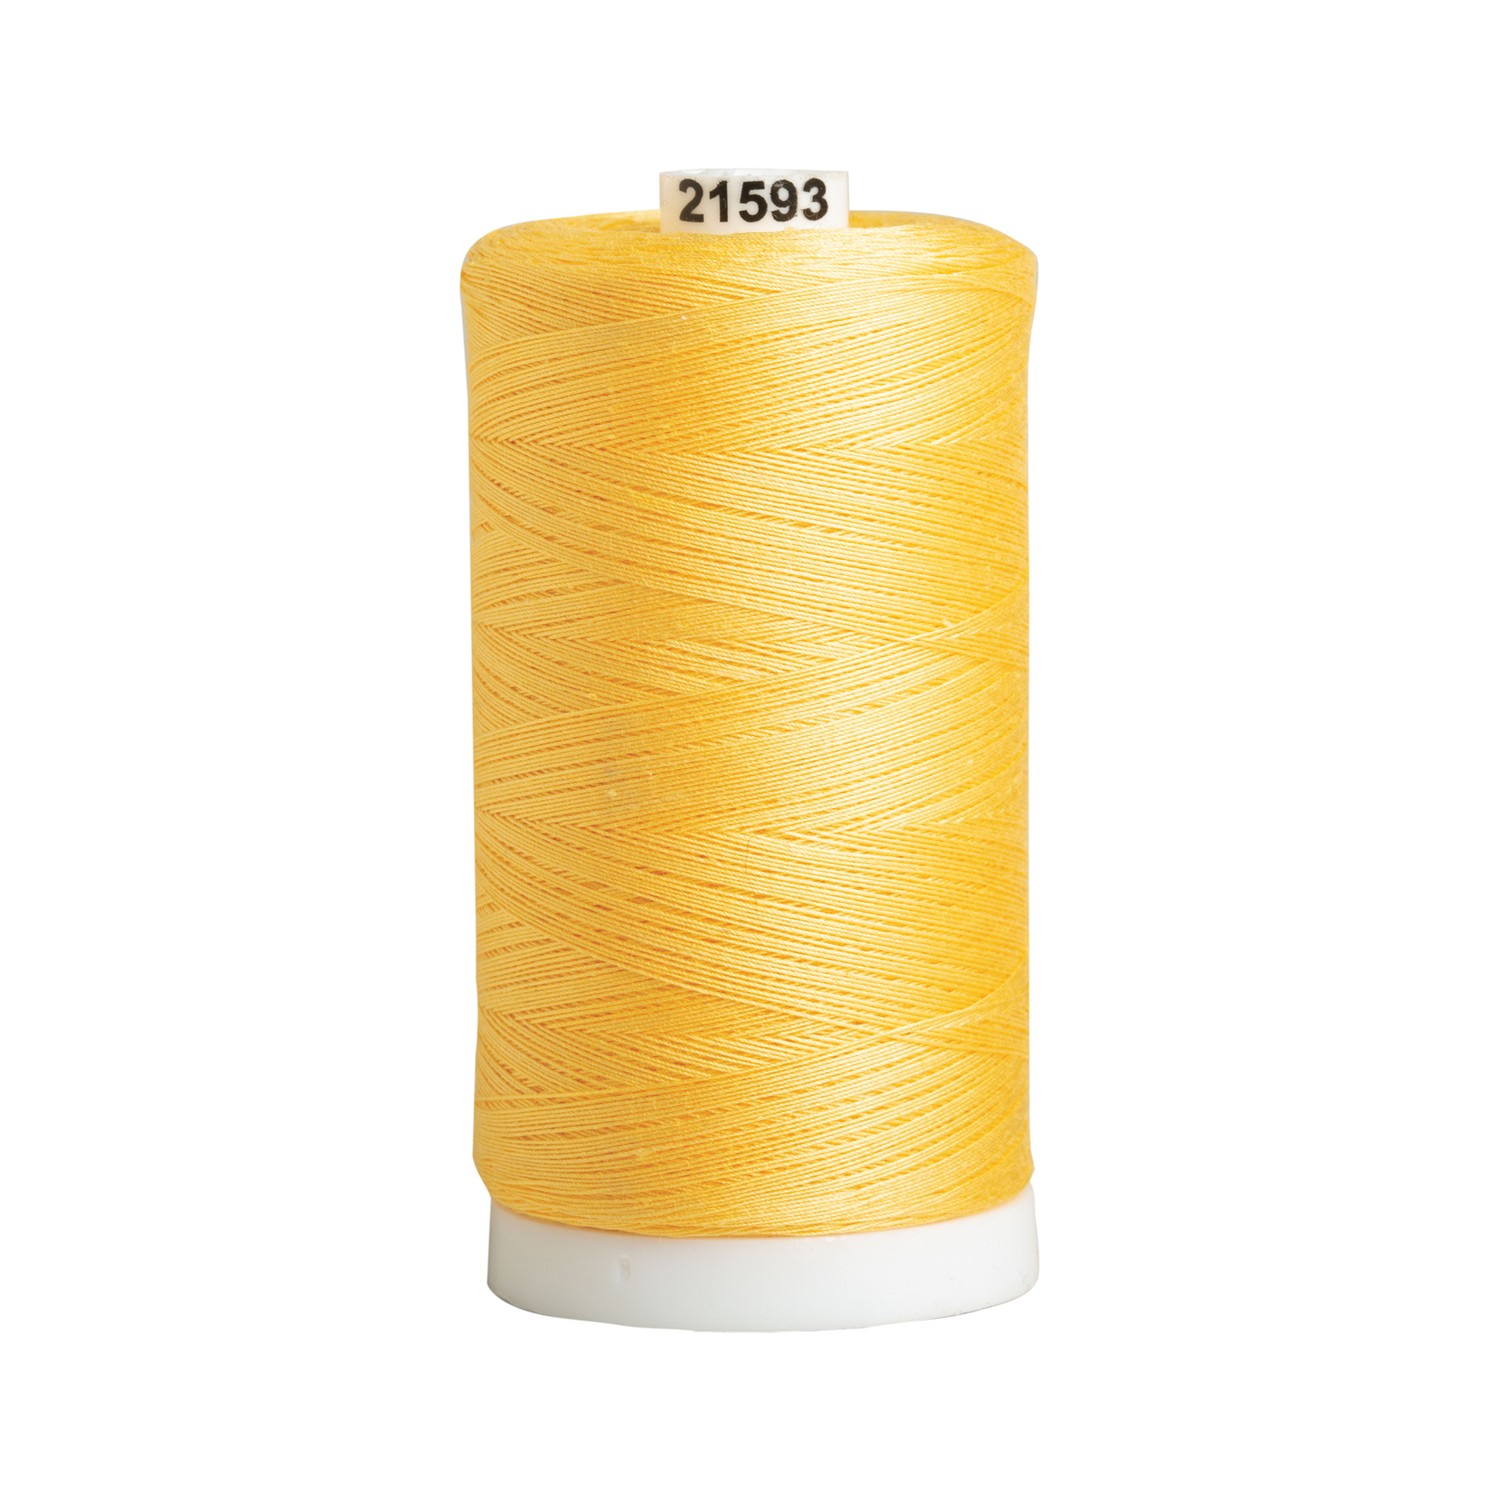 Connecting Threads 100% Cotton Essential Thread Set - 26 Spools 220 Yards  Each with Carrier